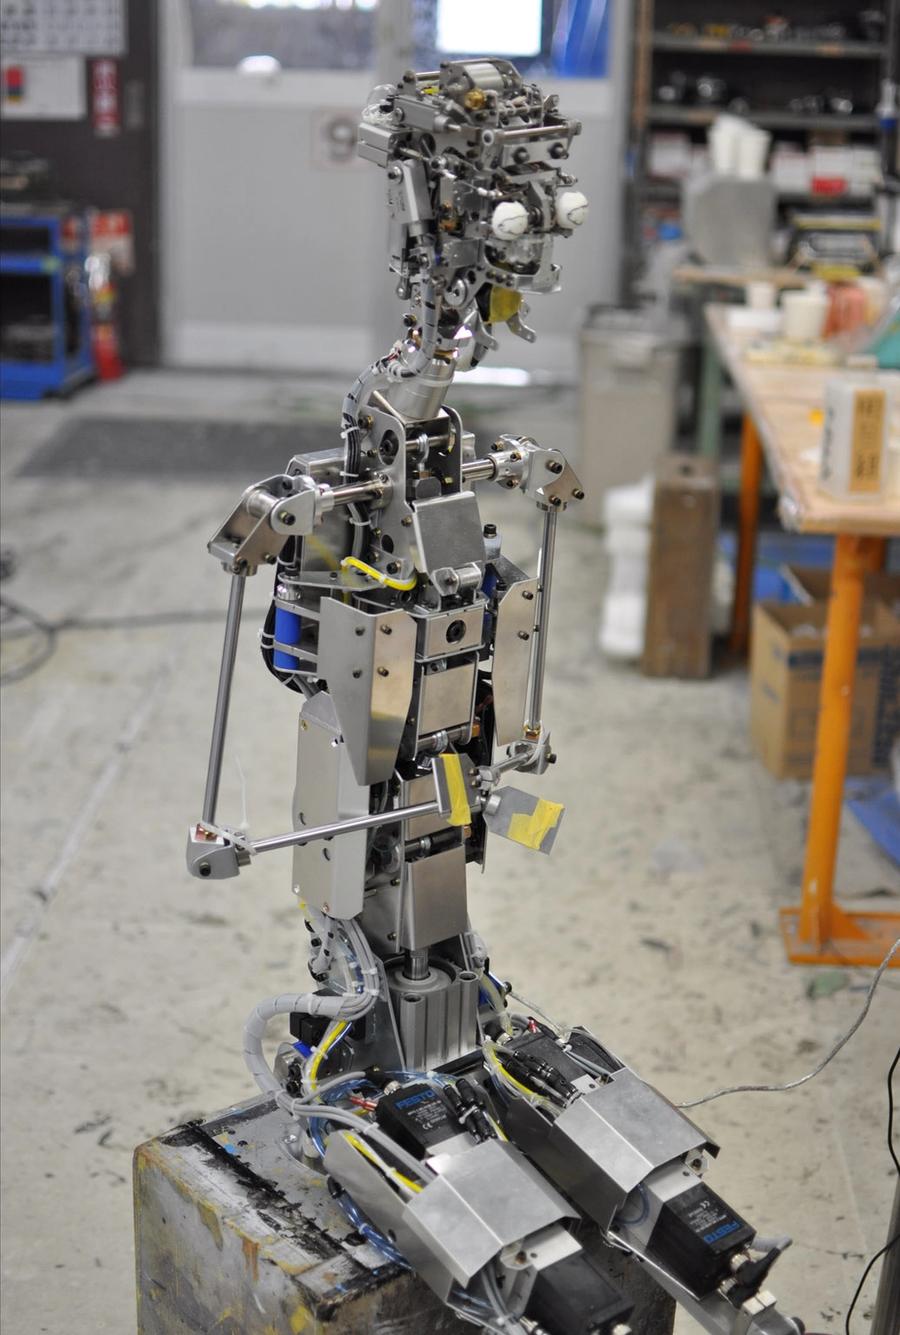 Full body view of the seated metal and electronic skeleton of the robot.